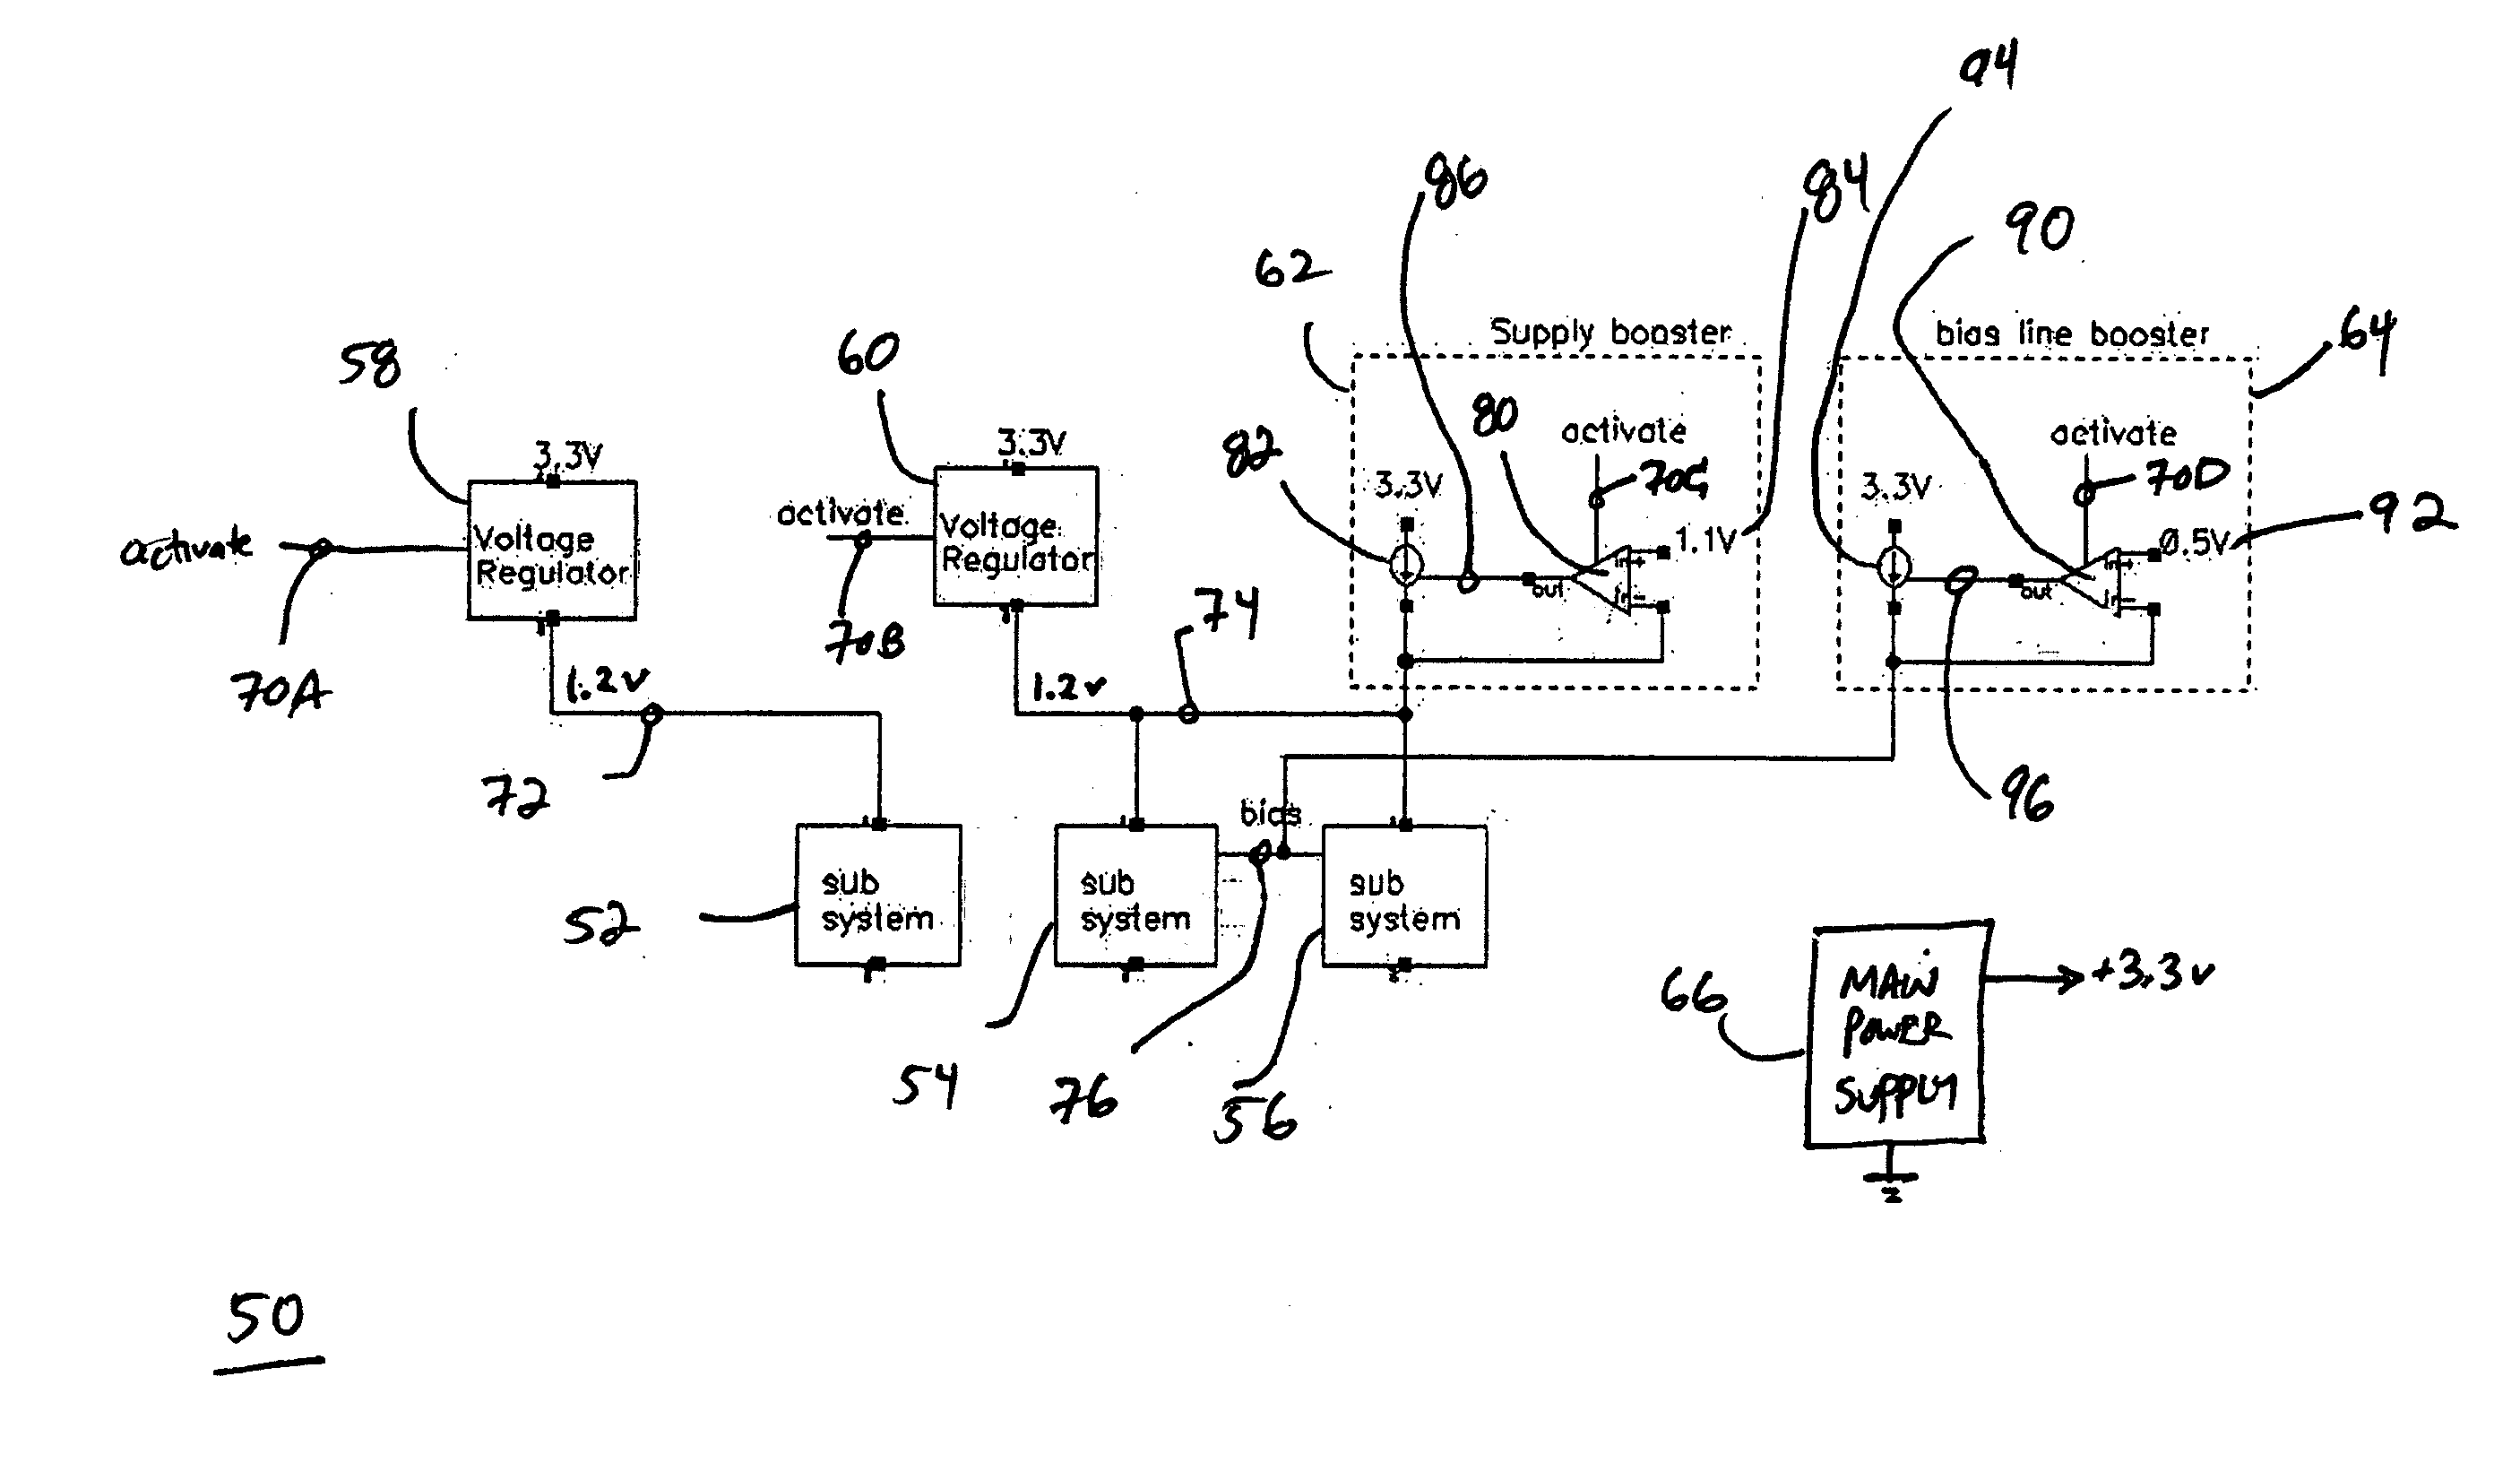 Method and circuit for improving device power up timing and predictability